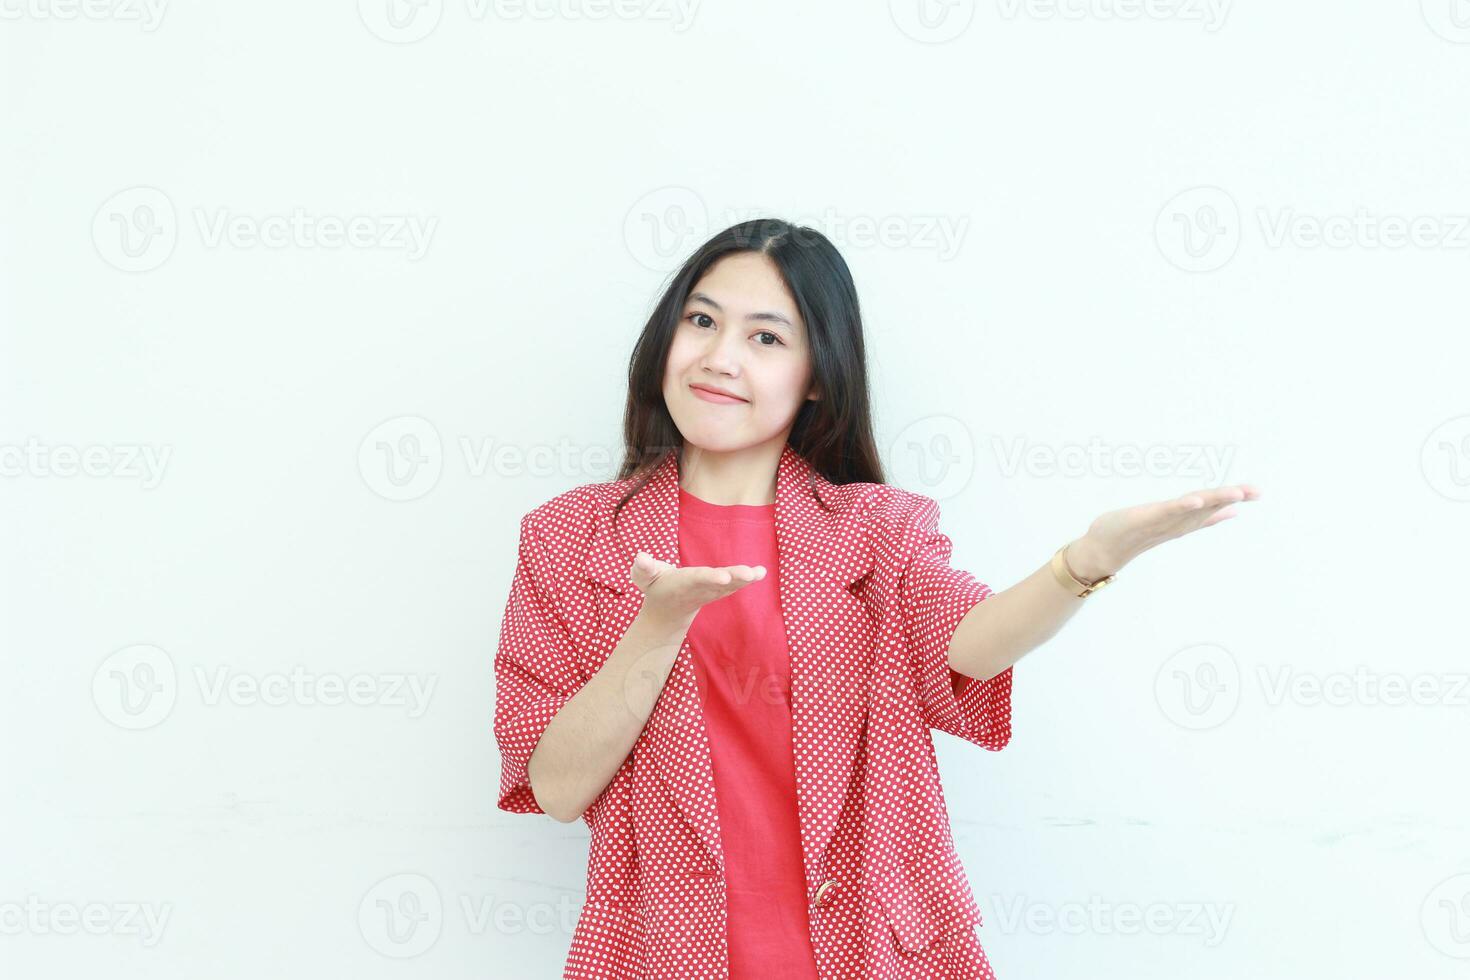 portrait of beautiful asian woman wearing red outfit pointing to the side for copy space photo